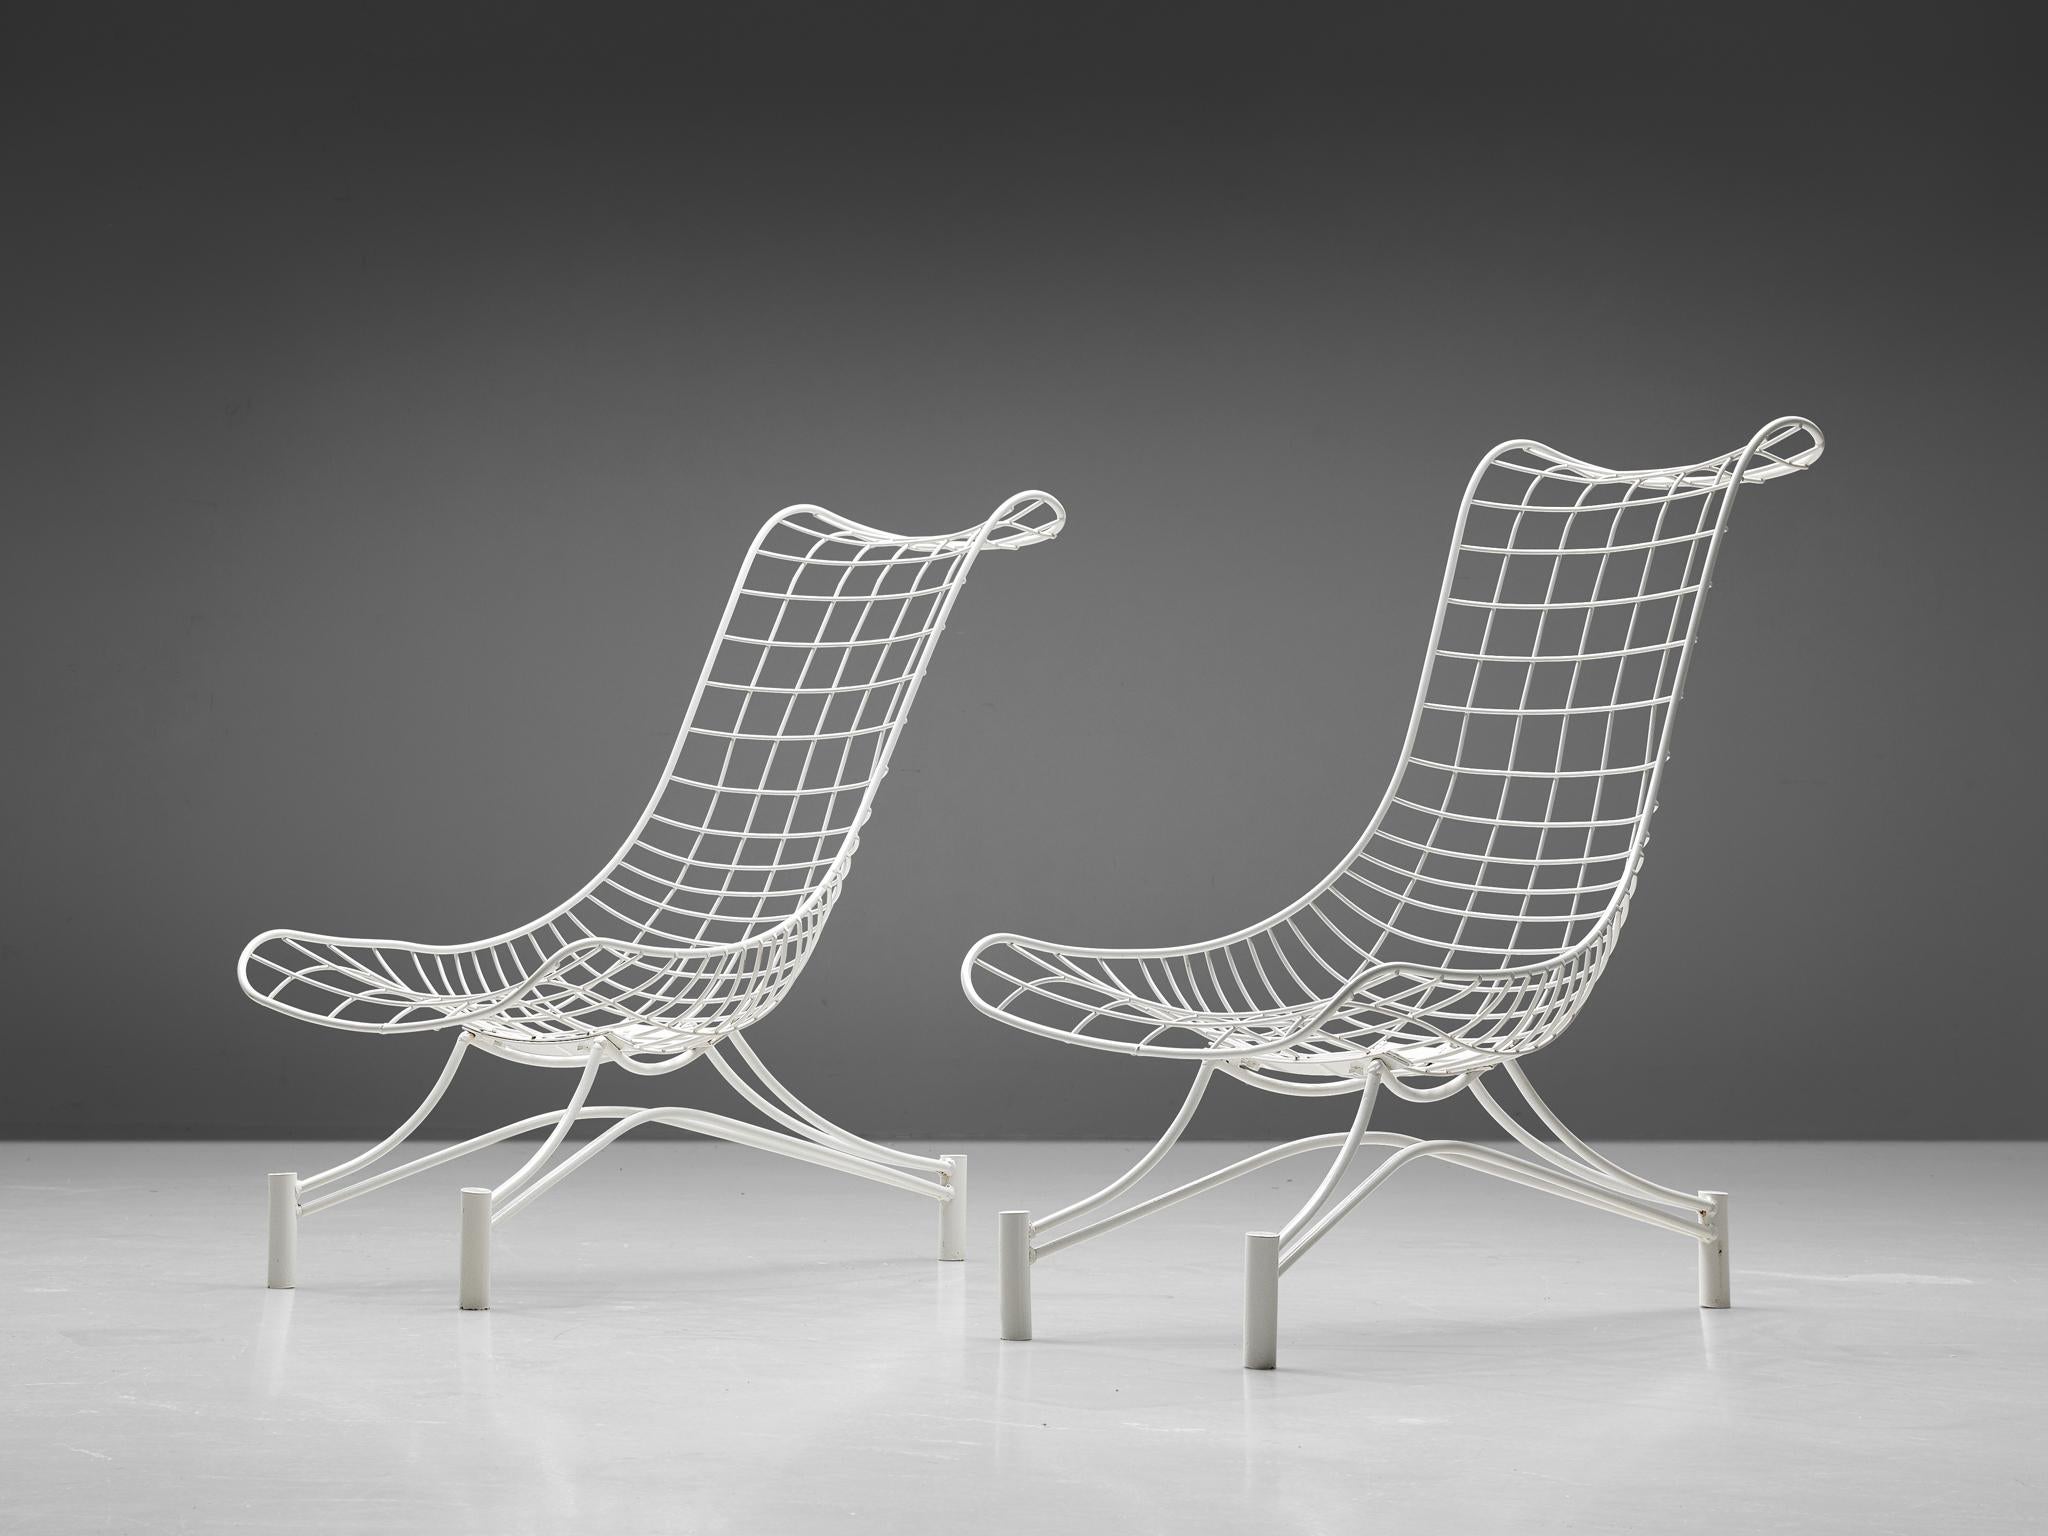 Vladimir Kagan, pair of 'Capricorn' lounge chairs, lacquered metal, United States, circa. 1958

The ‘Capricorn’ chair epitomizes a splendid construction that is suitable for indoor and outdoor, making it a dynamic and easily adaptable chair. The